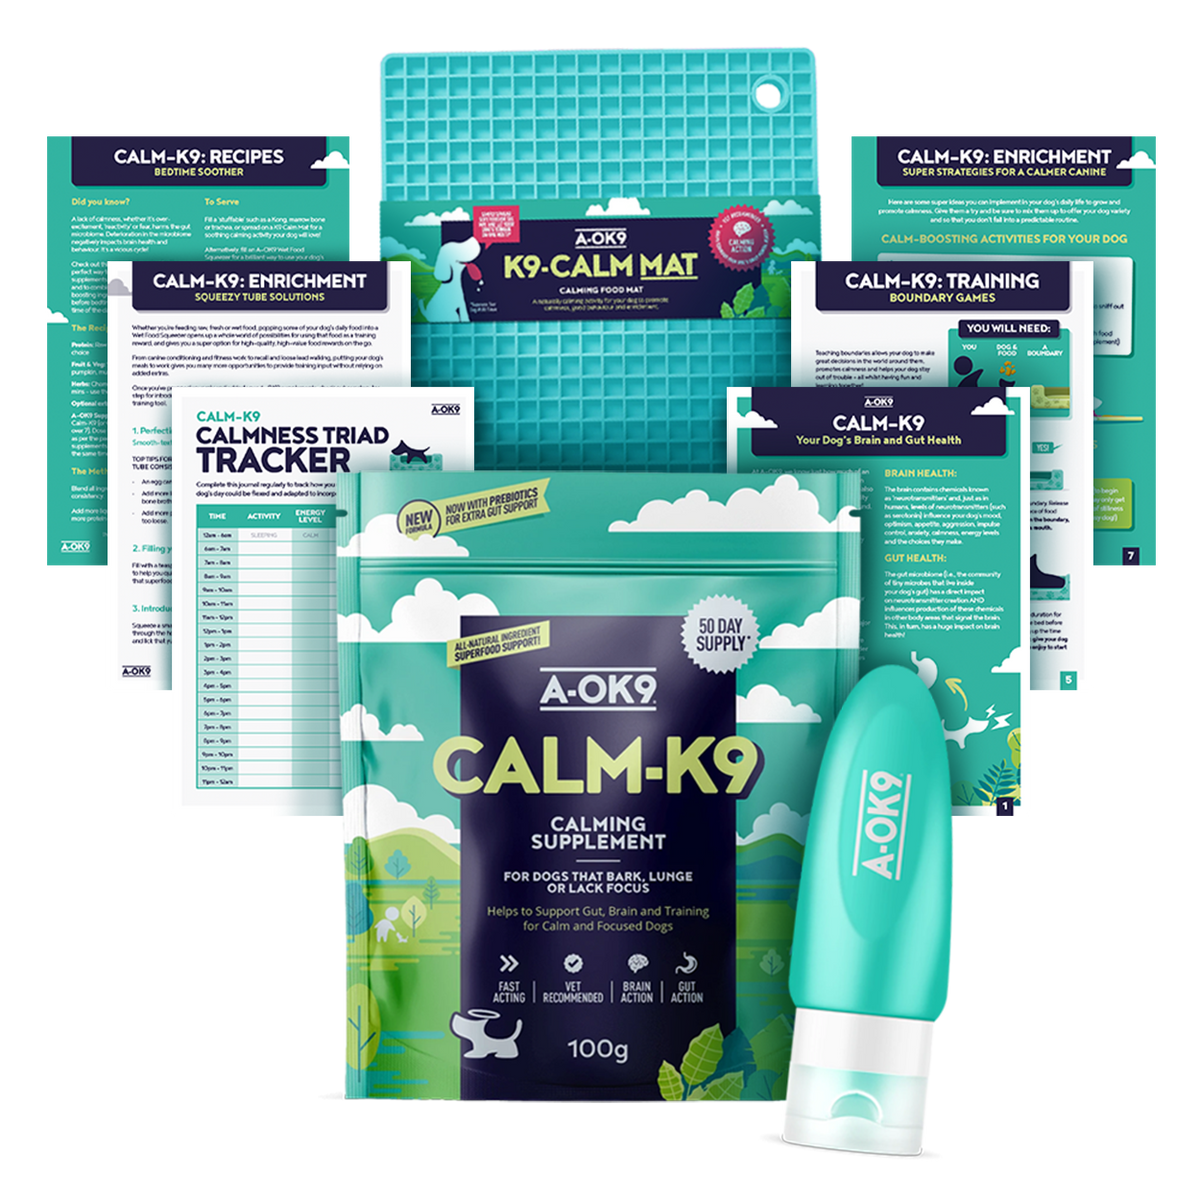 CALM-K9 Results Pack